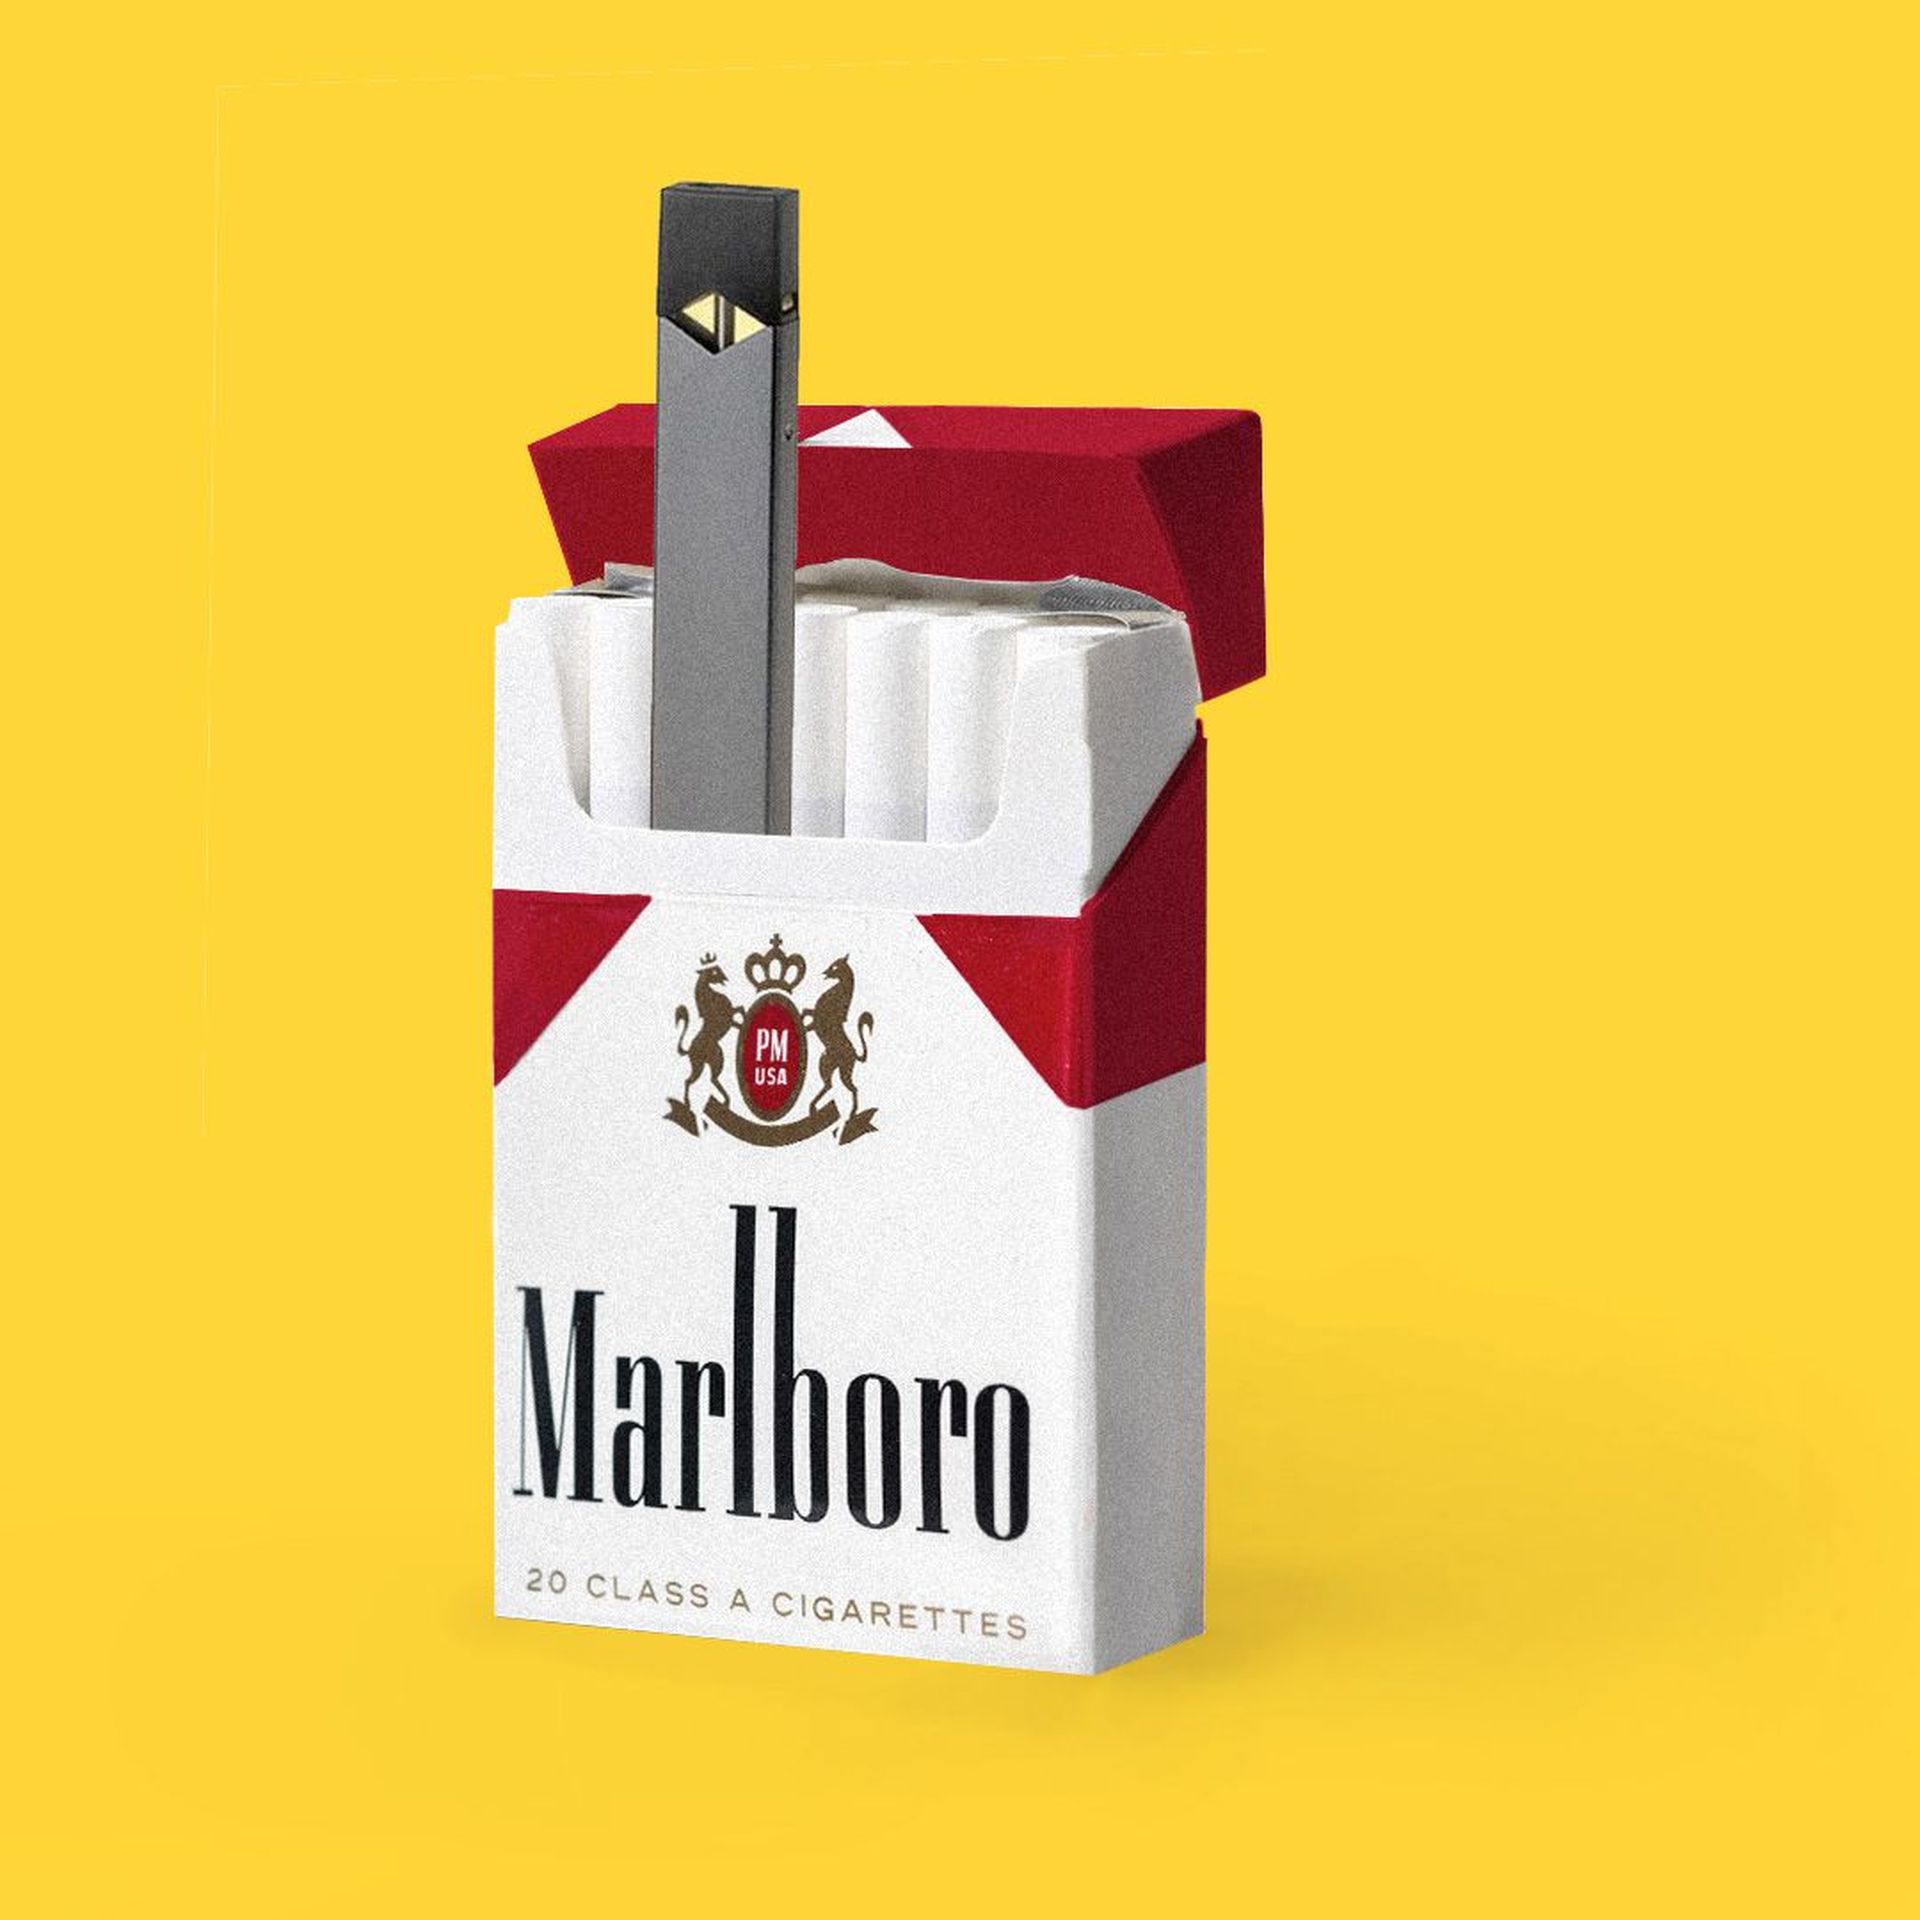 Illustration of Juul vape sticking out of a pack of Marlboro cigarettes.